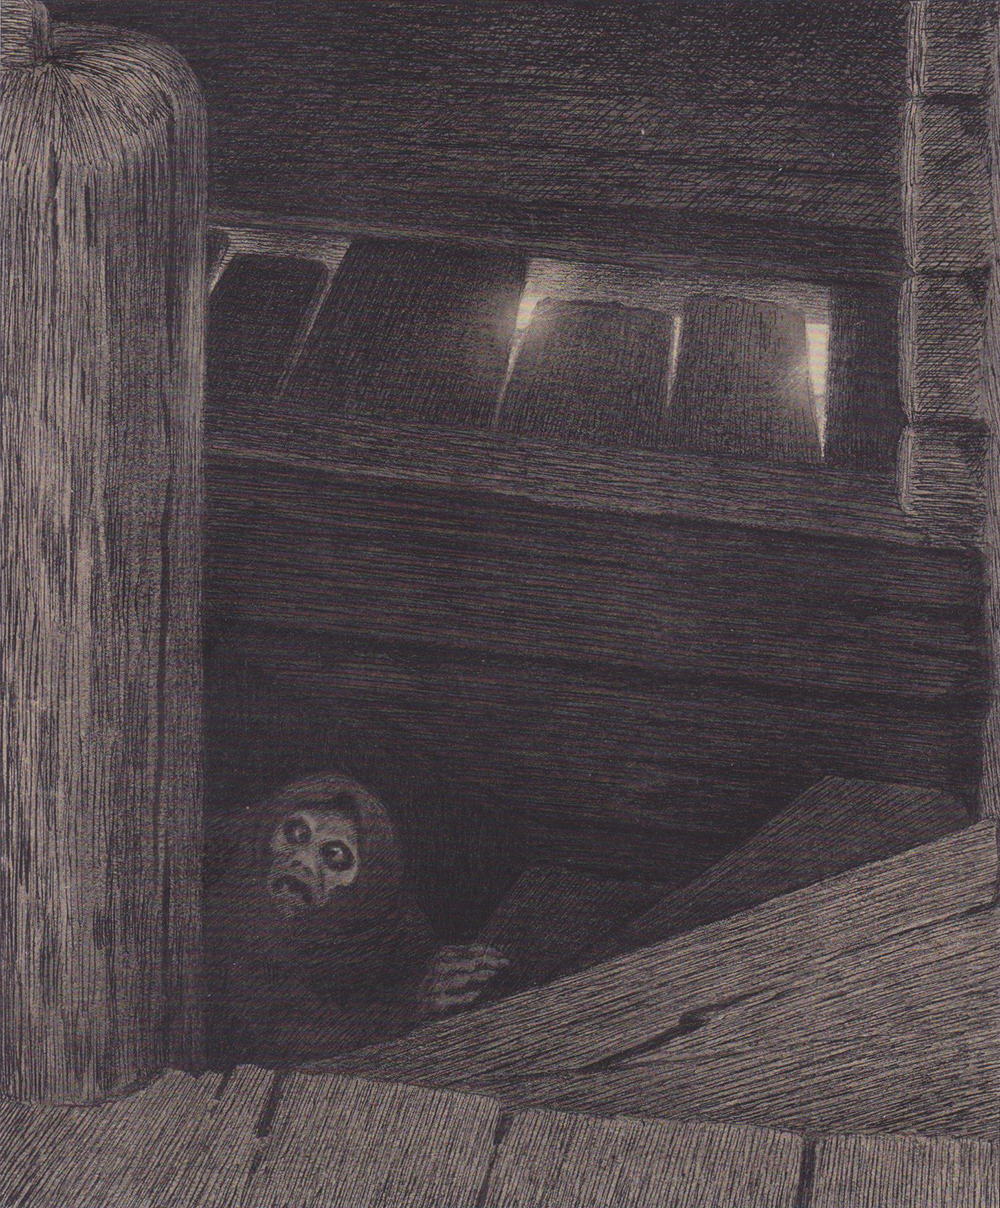 “The Plague on the Stair,” by Theodor Severin Kittelsen, 1896.